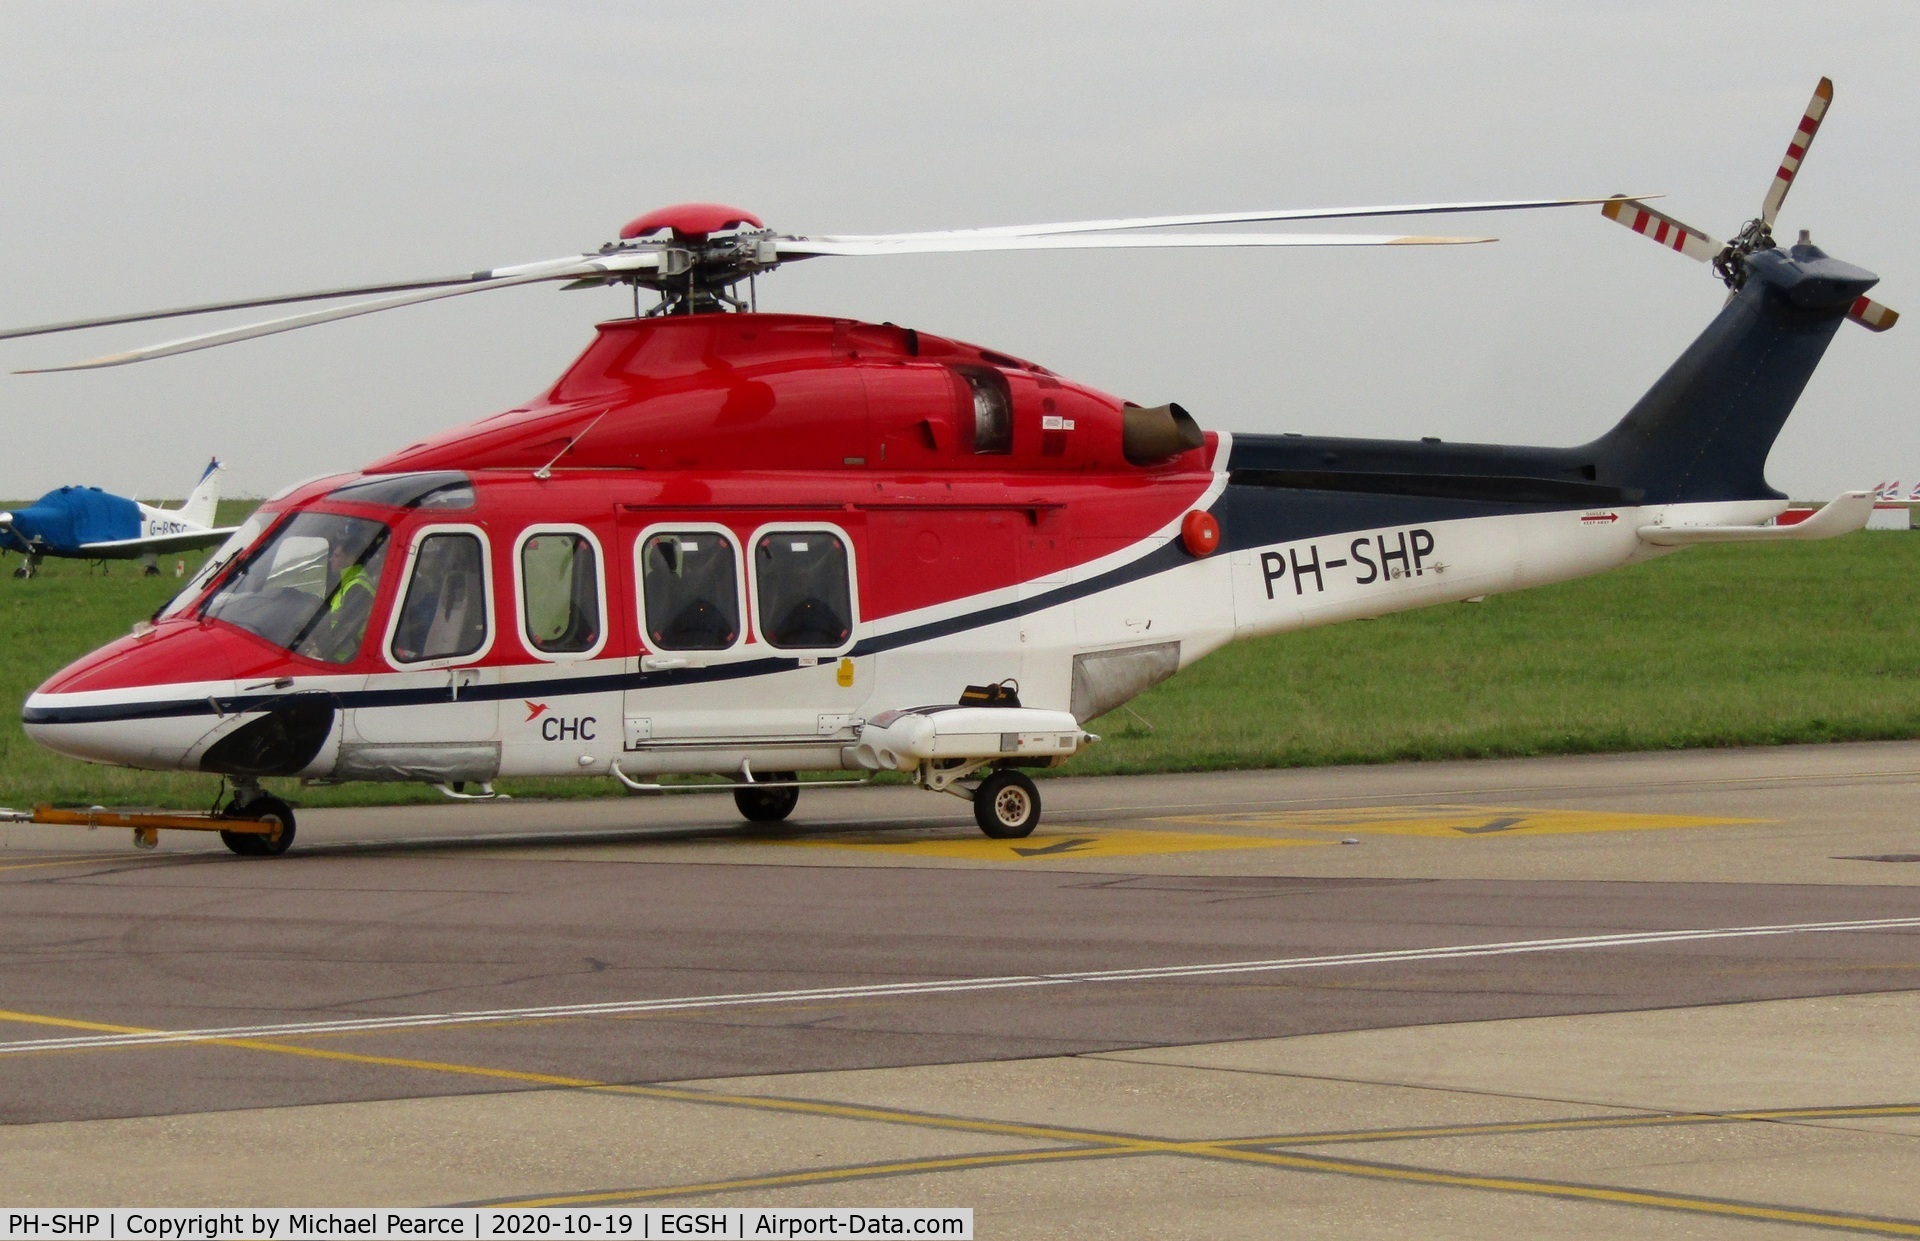 PH-SHP, 2007 AgustaWestland AW-139 C/N 31099, Under tow from SaxonAir to CHC Helicopters.